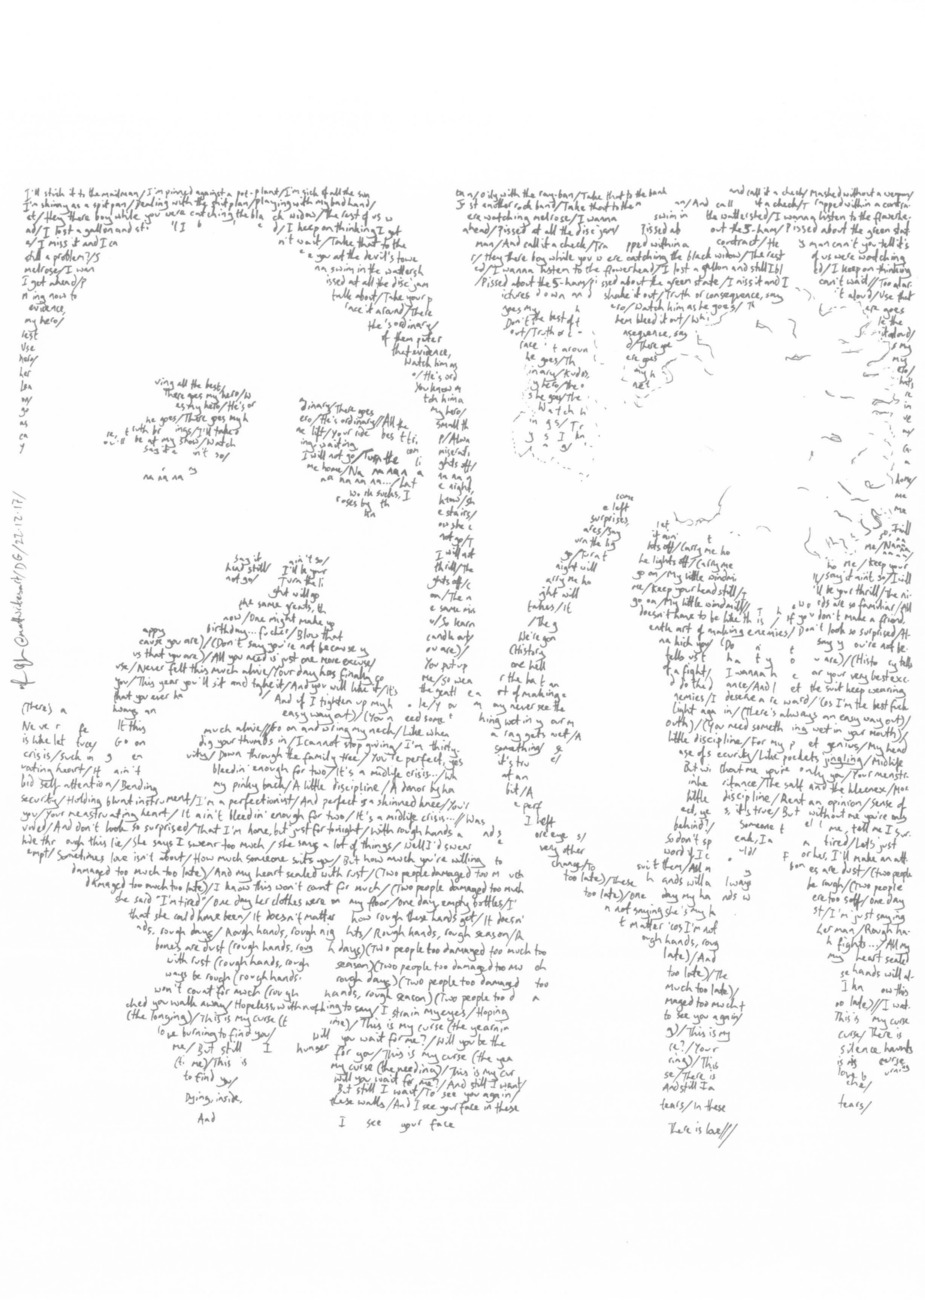 Portrait of Dave Grohl with singer's lyrics